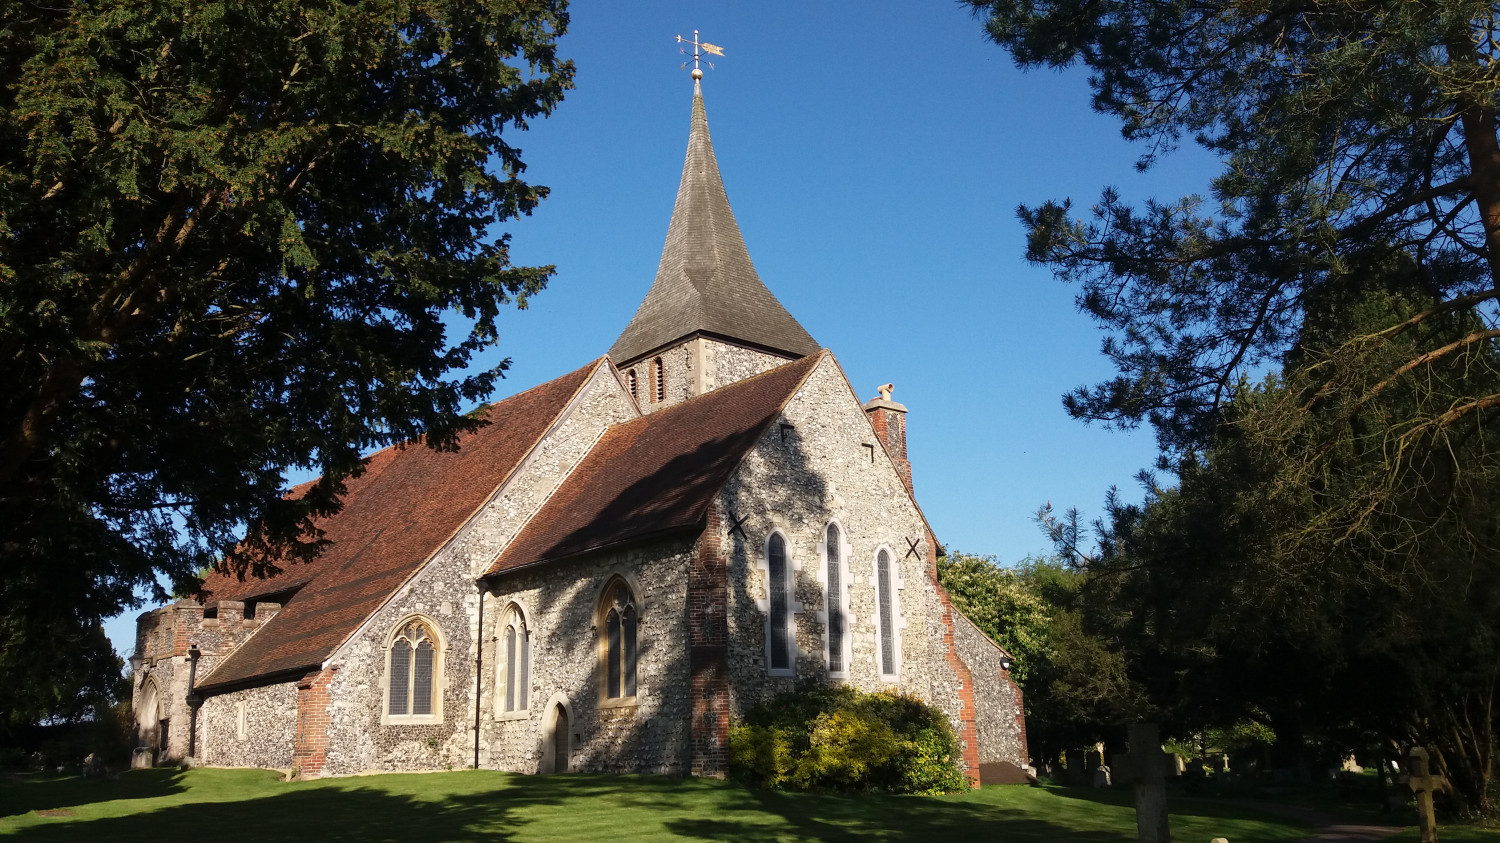 An outside view of St Martin of Tours church bathed in sunshine.